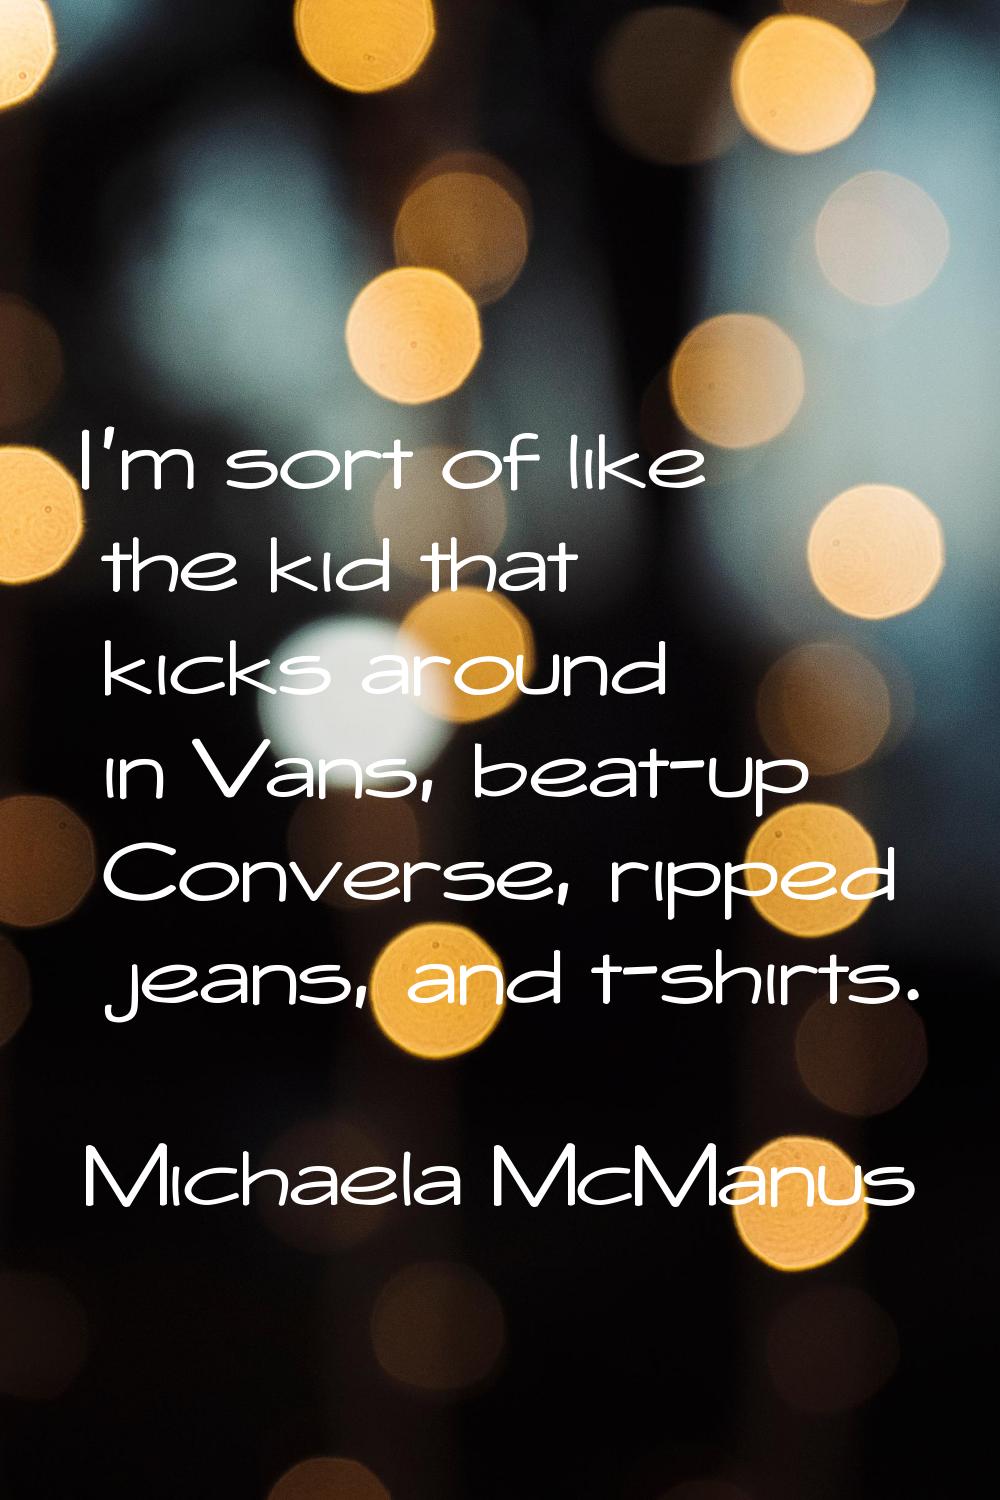 I'm sort of like the kid that kicks around in Vans, beat-up Converse, ripped jeans, and t-shirts.